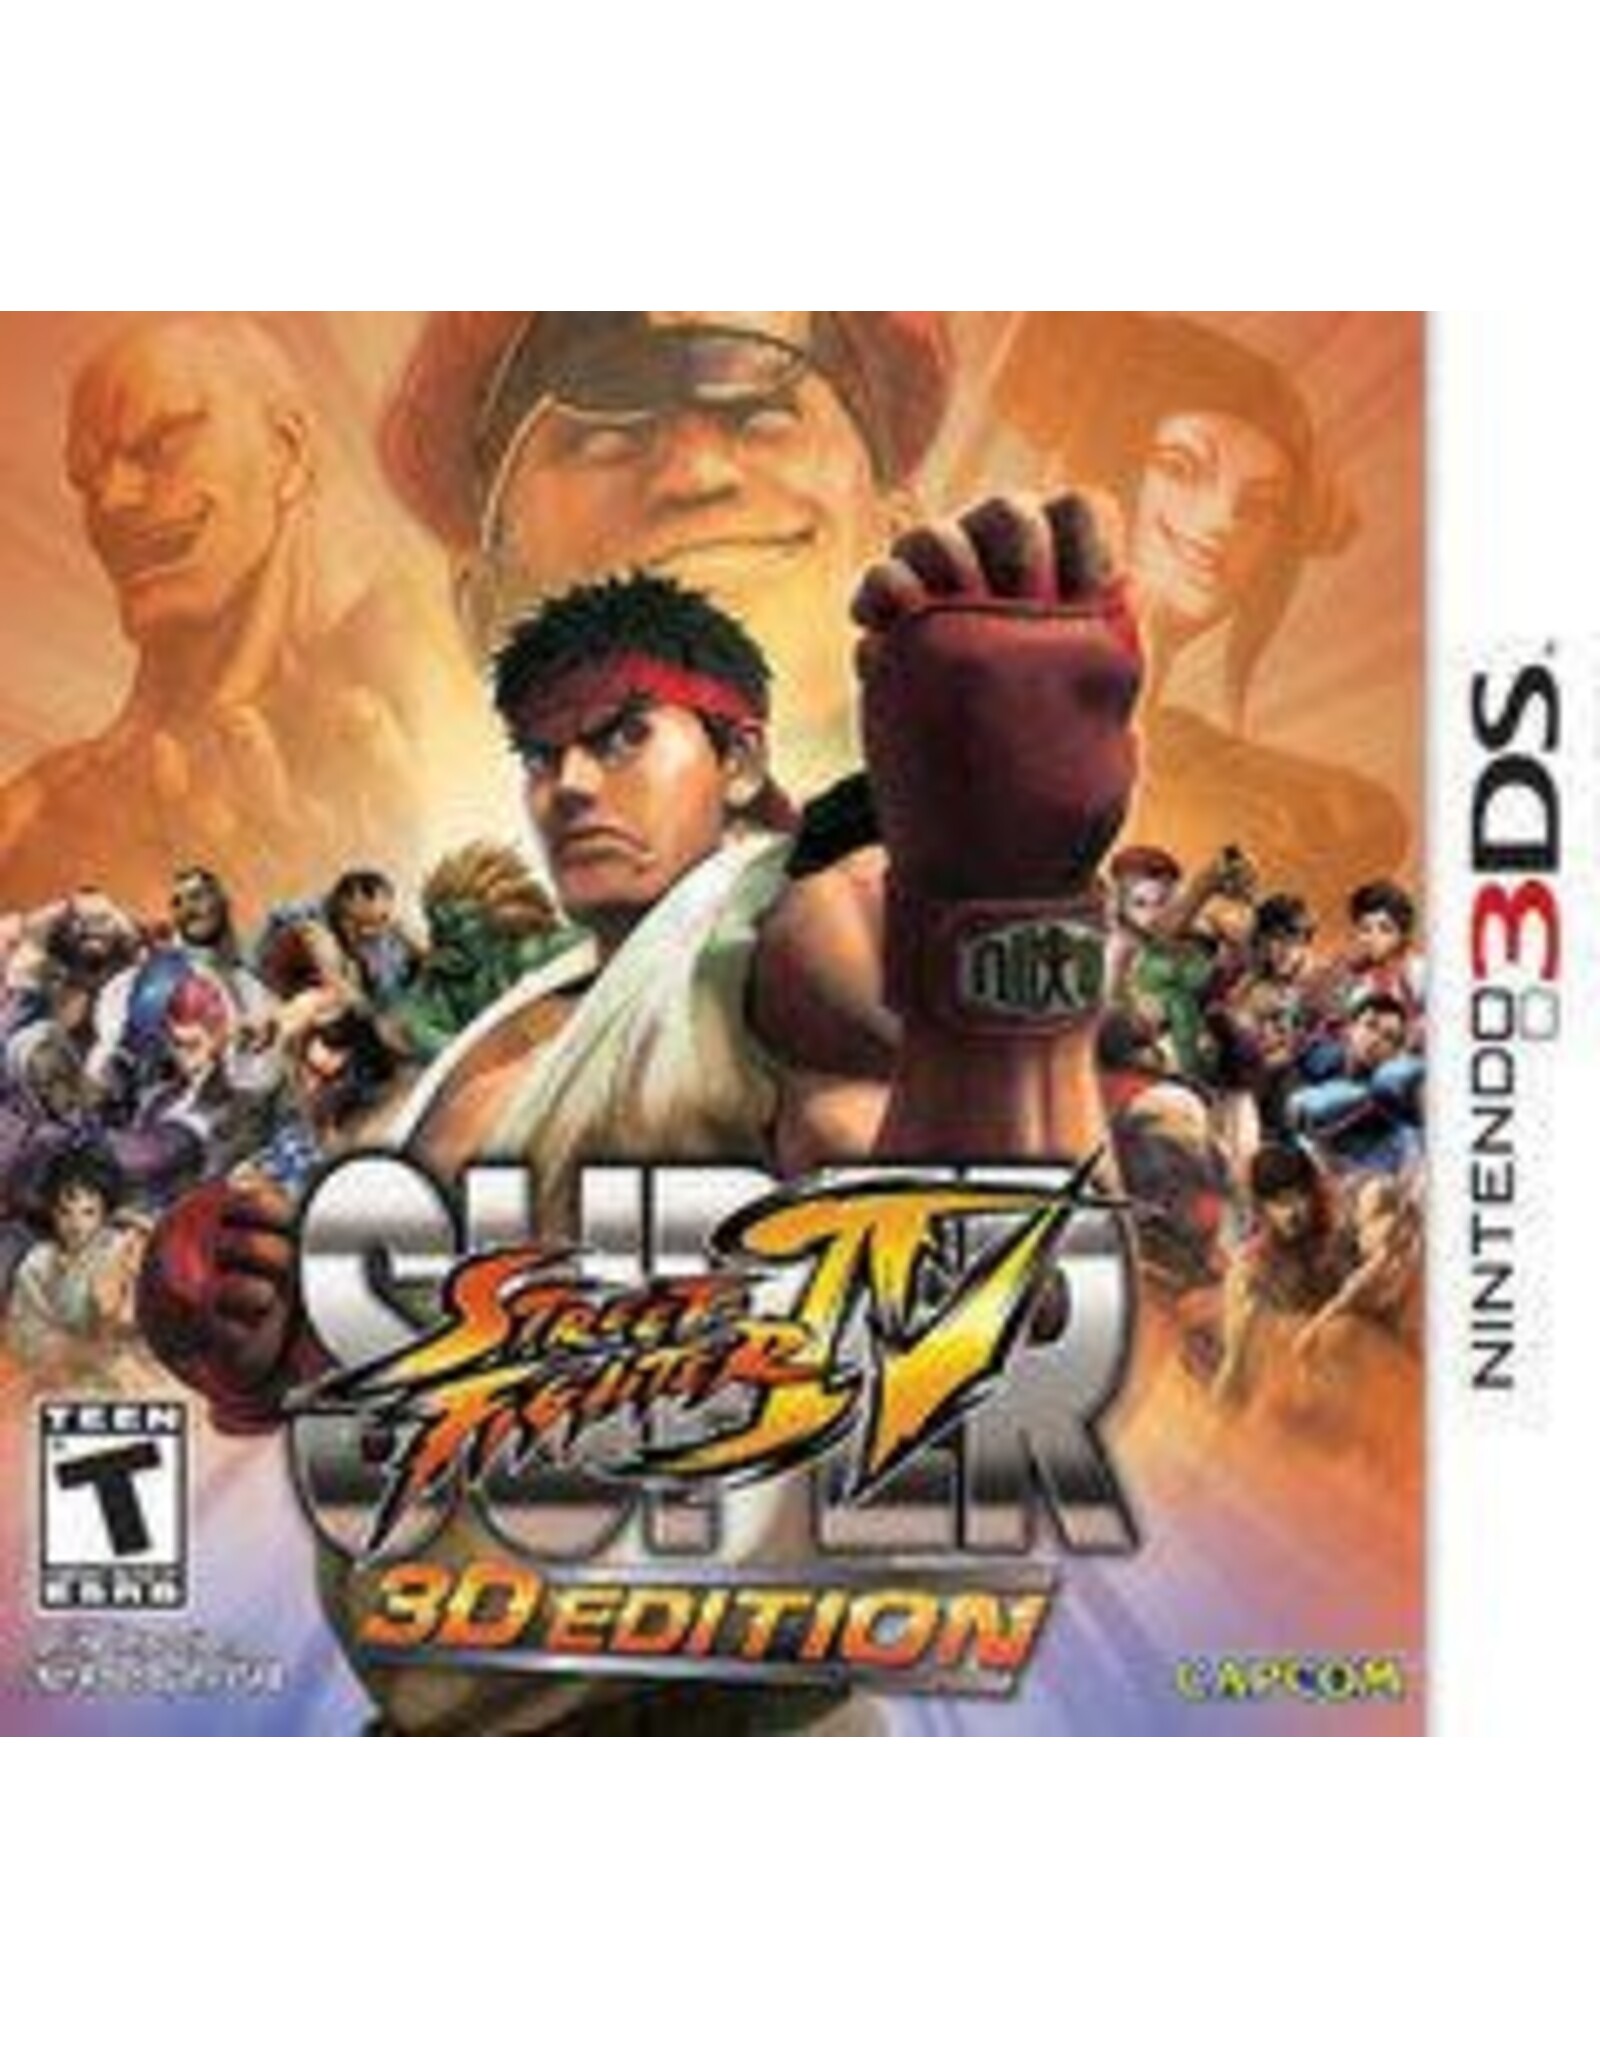 Nintendo 3DS Super Street Fighter IV 3D Edition (Used, Cart Only)